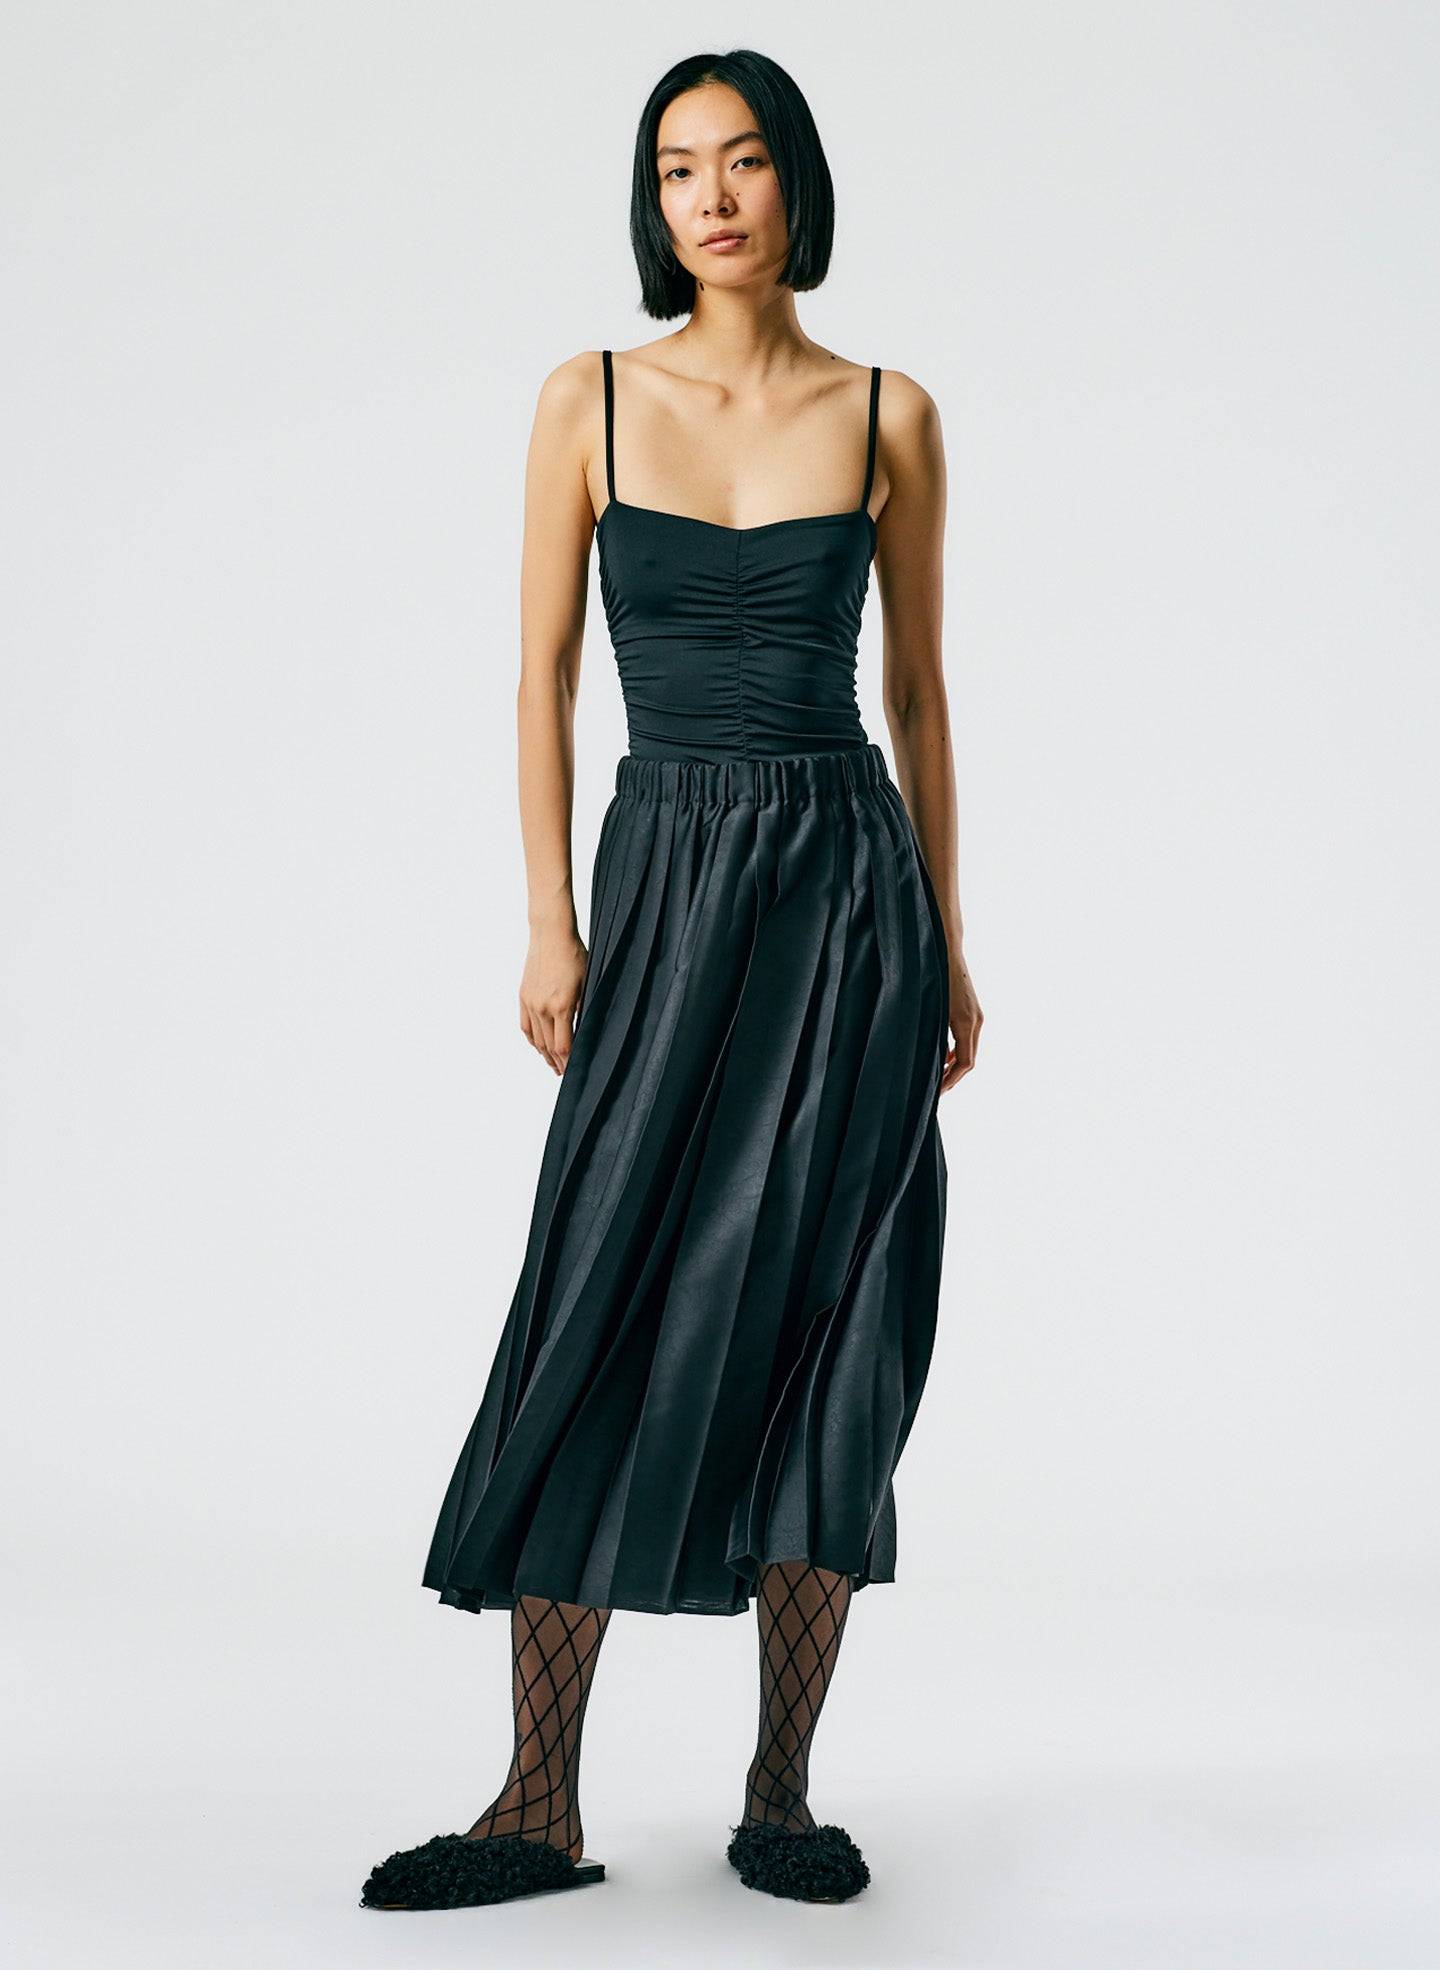 Feather Weight Pleated Pull On Skirt